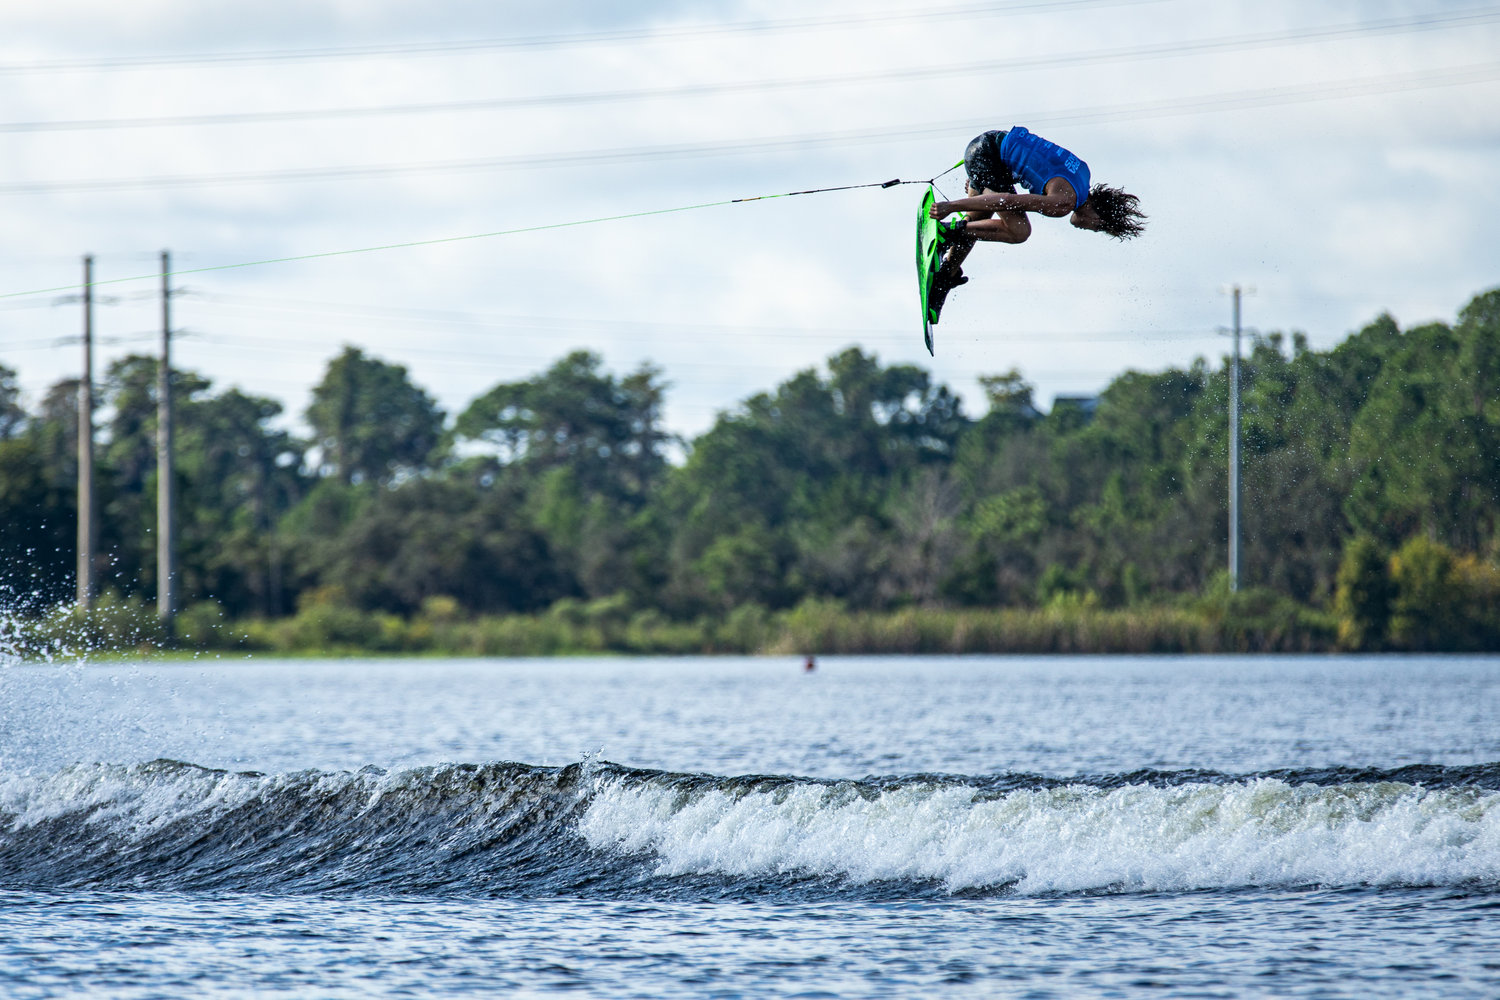 Some of the world’s most talented wakeboarders and wakesurfers come to Katy on Saturday, June 12, to compete at the Pro Wakeboard, Pro Wakesurf and Junior Pro Wakeboard tours. The circuit will take place on August Lakes, Katy’s 100-plus acre watersports community facility located at 3707 Pitts Road.